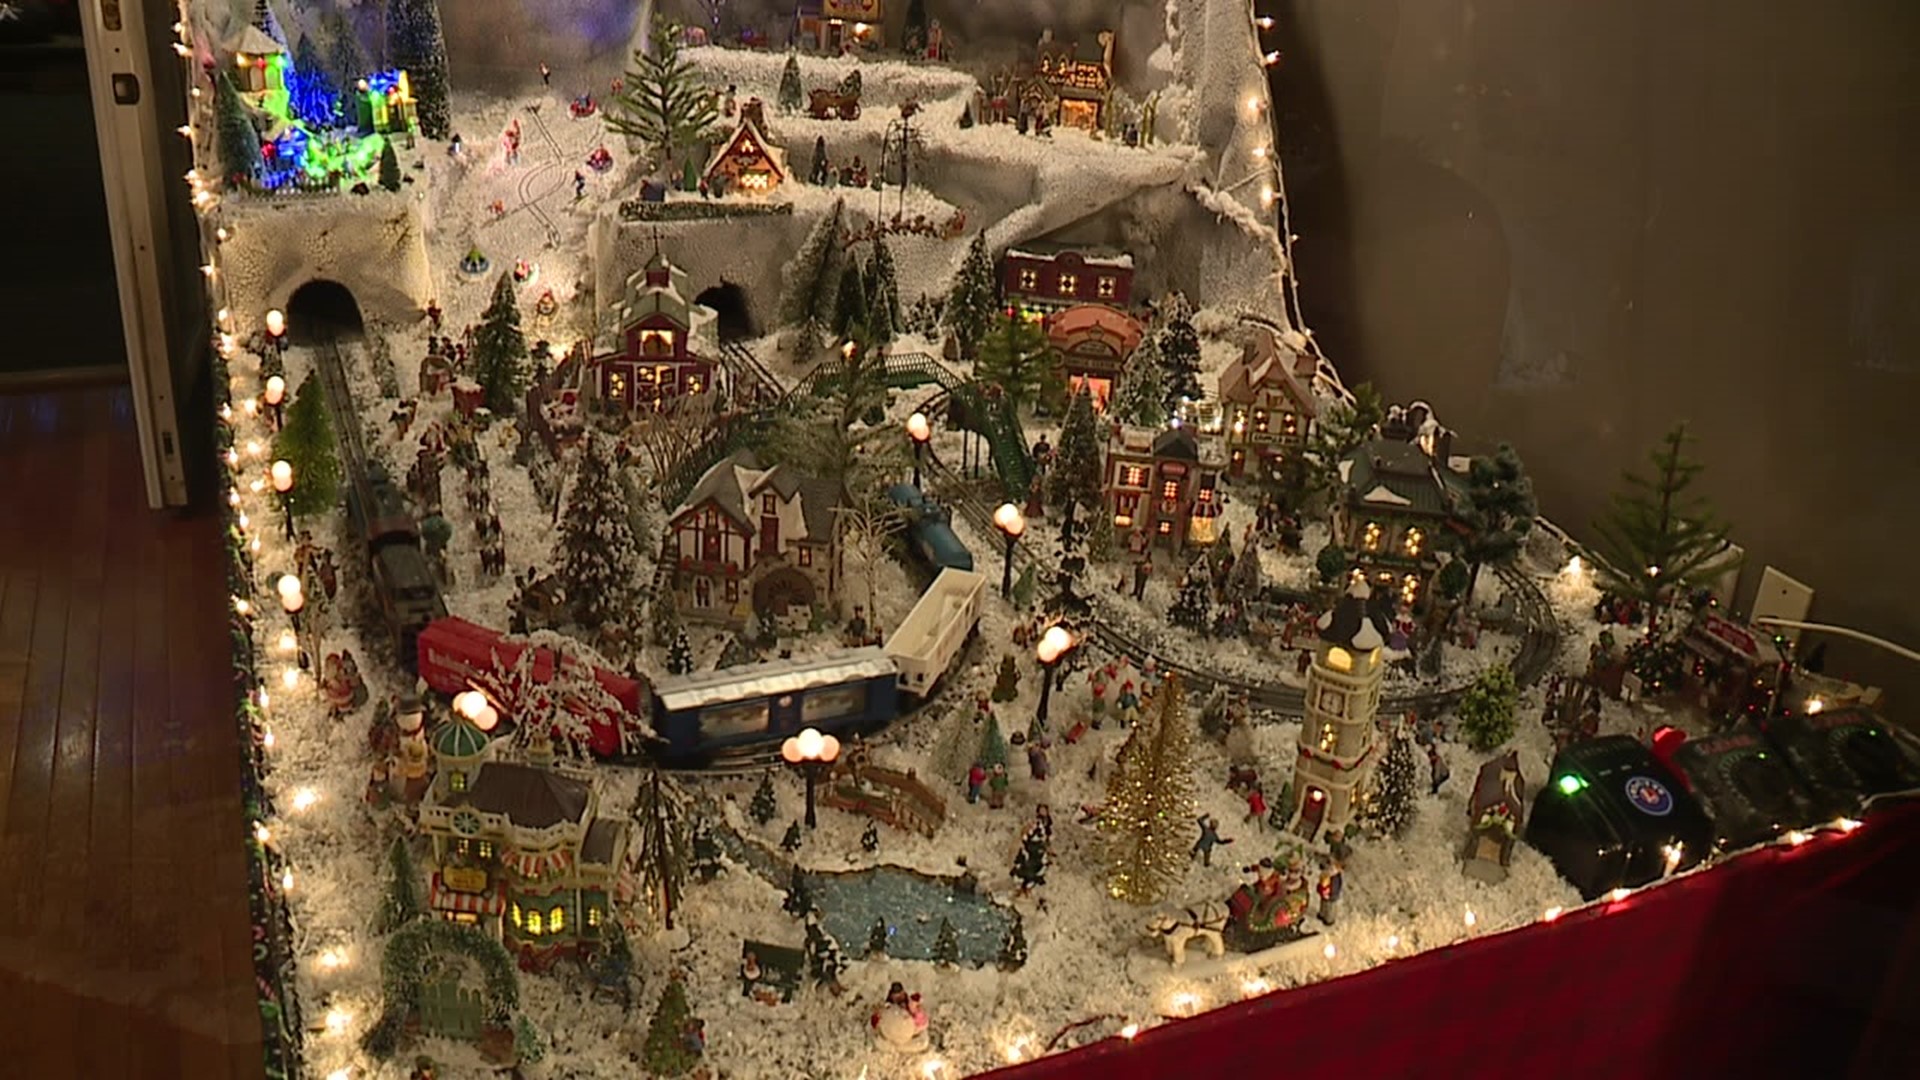 In a family's home in Lycoming County, you find half the kitchen transformed into a winter wonderland, a Christmas village straddling the room.